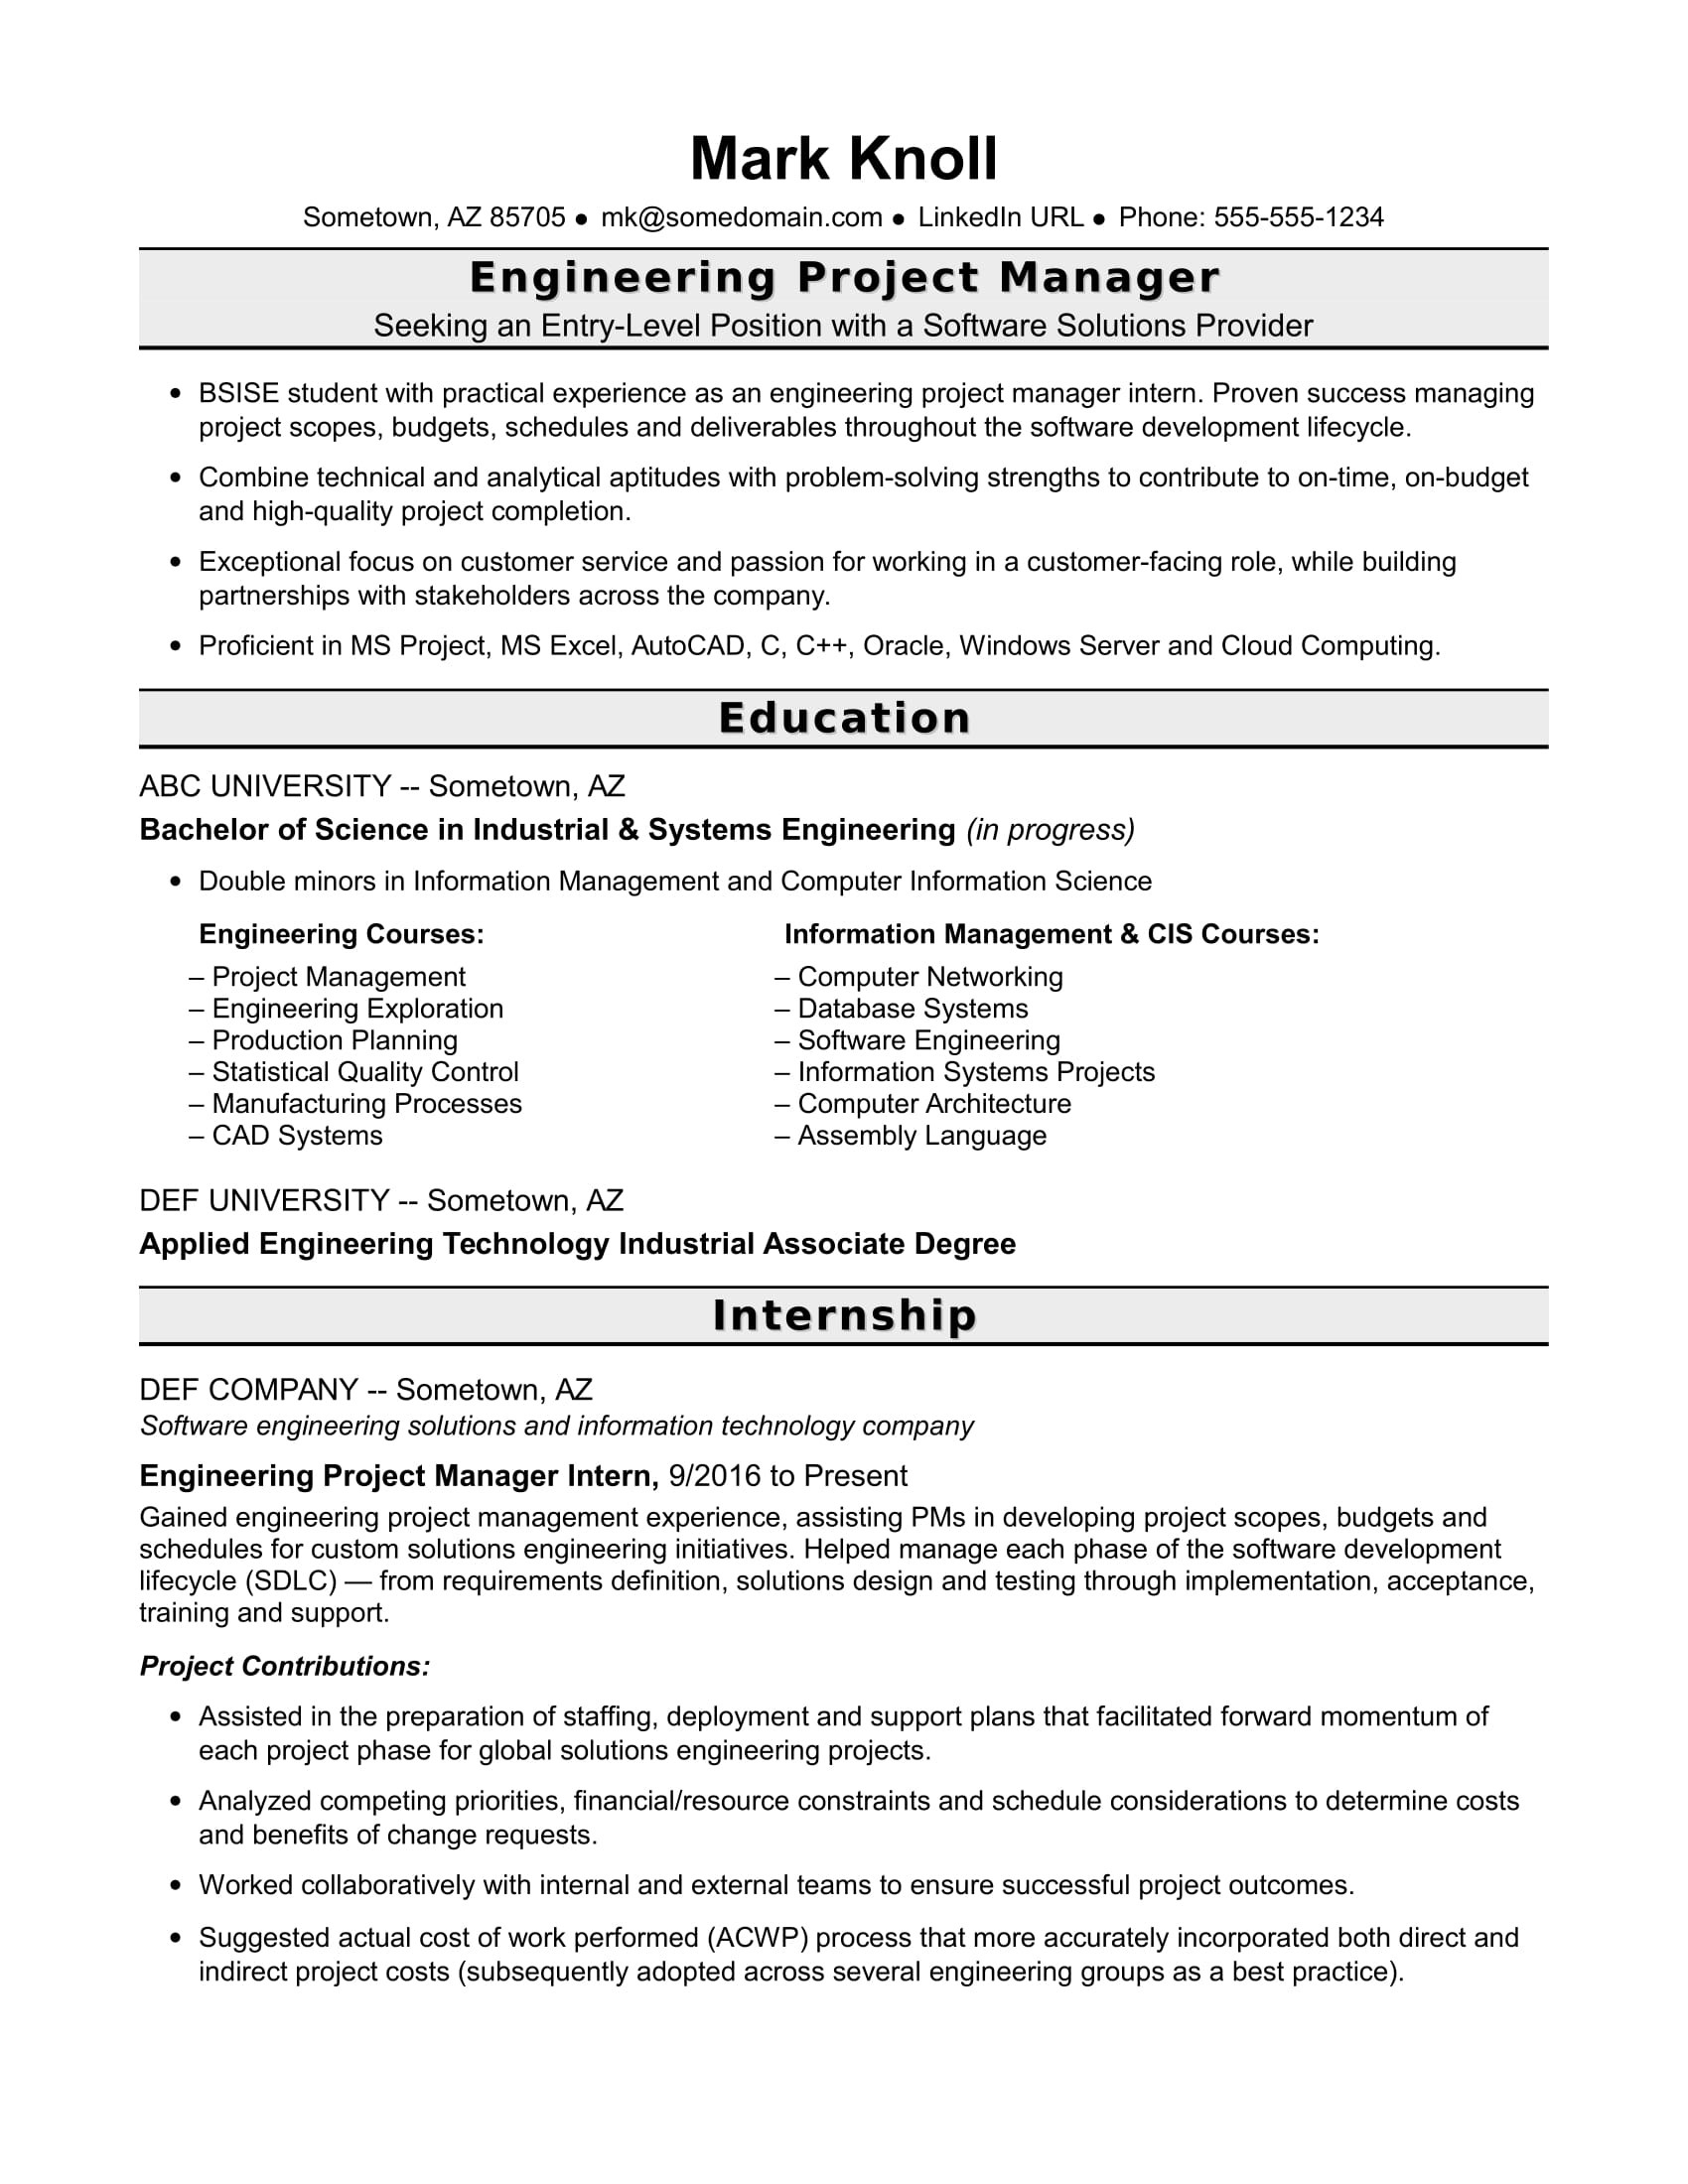 Sample Group Project Info In Resume Entry-level Project Manager Resume for Engineers Monster.com